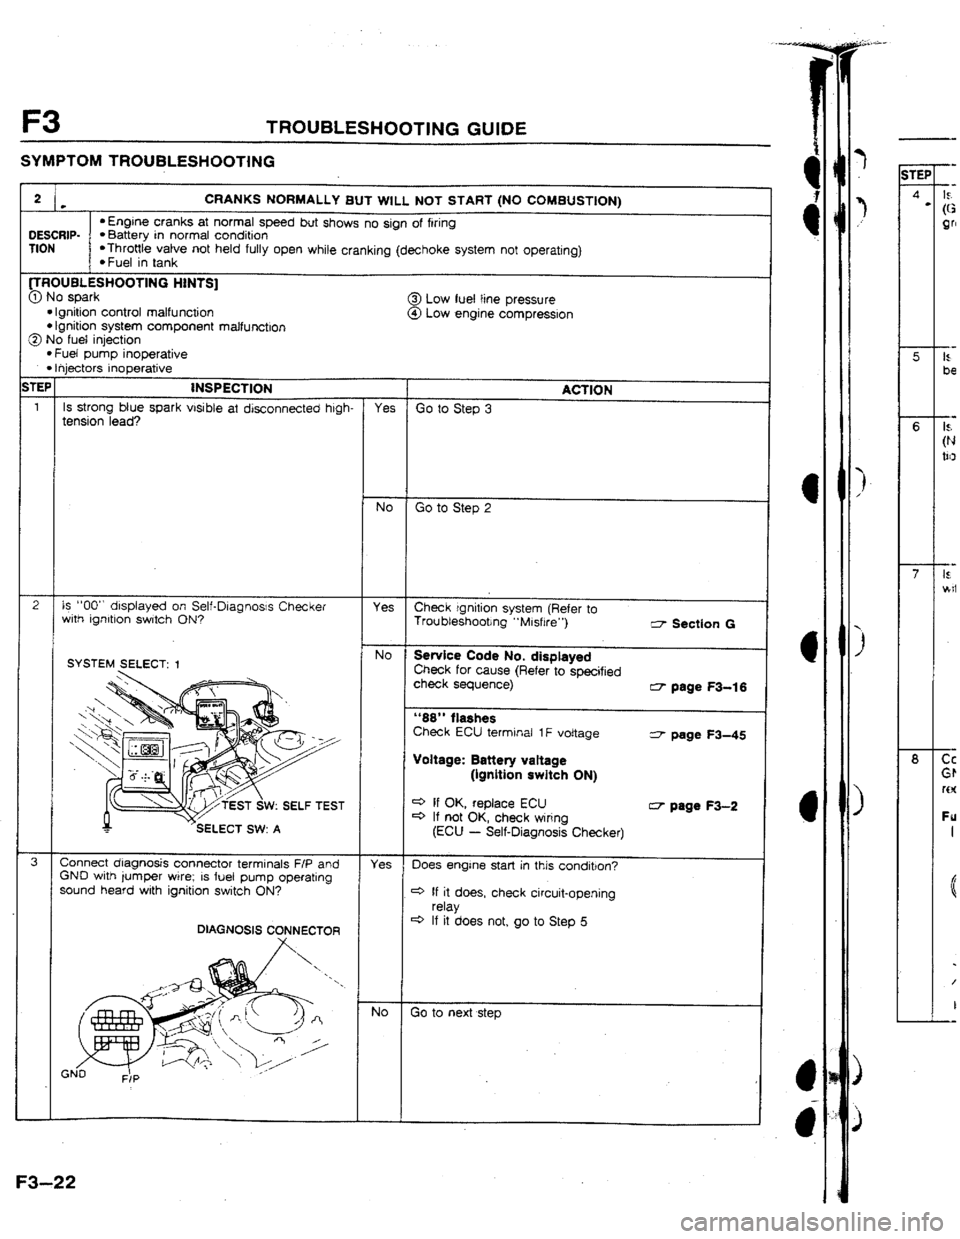 MAZDA 323 1992  Workshop Manual Suplement F3 TROUBLESHOOTING GUIDE 
SYMPTOM TROUSLESHOOTING 
2 . CRANKS NORMALLY BUT WILL NOT START (NO COMBUSTION) 
LIESCRIP- 
l Engine cranks at normal speed but shows no sign of firing l Battery in normal co